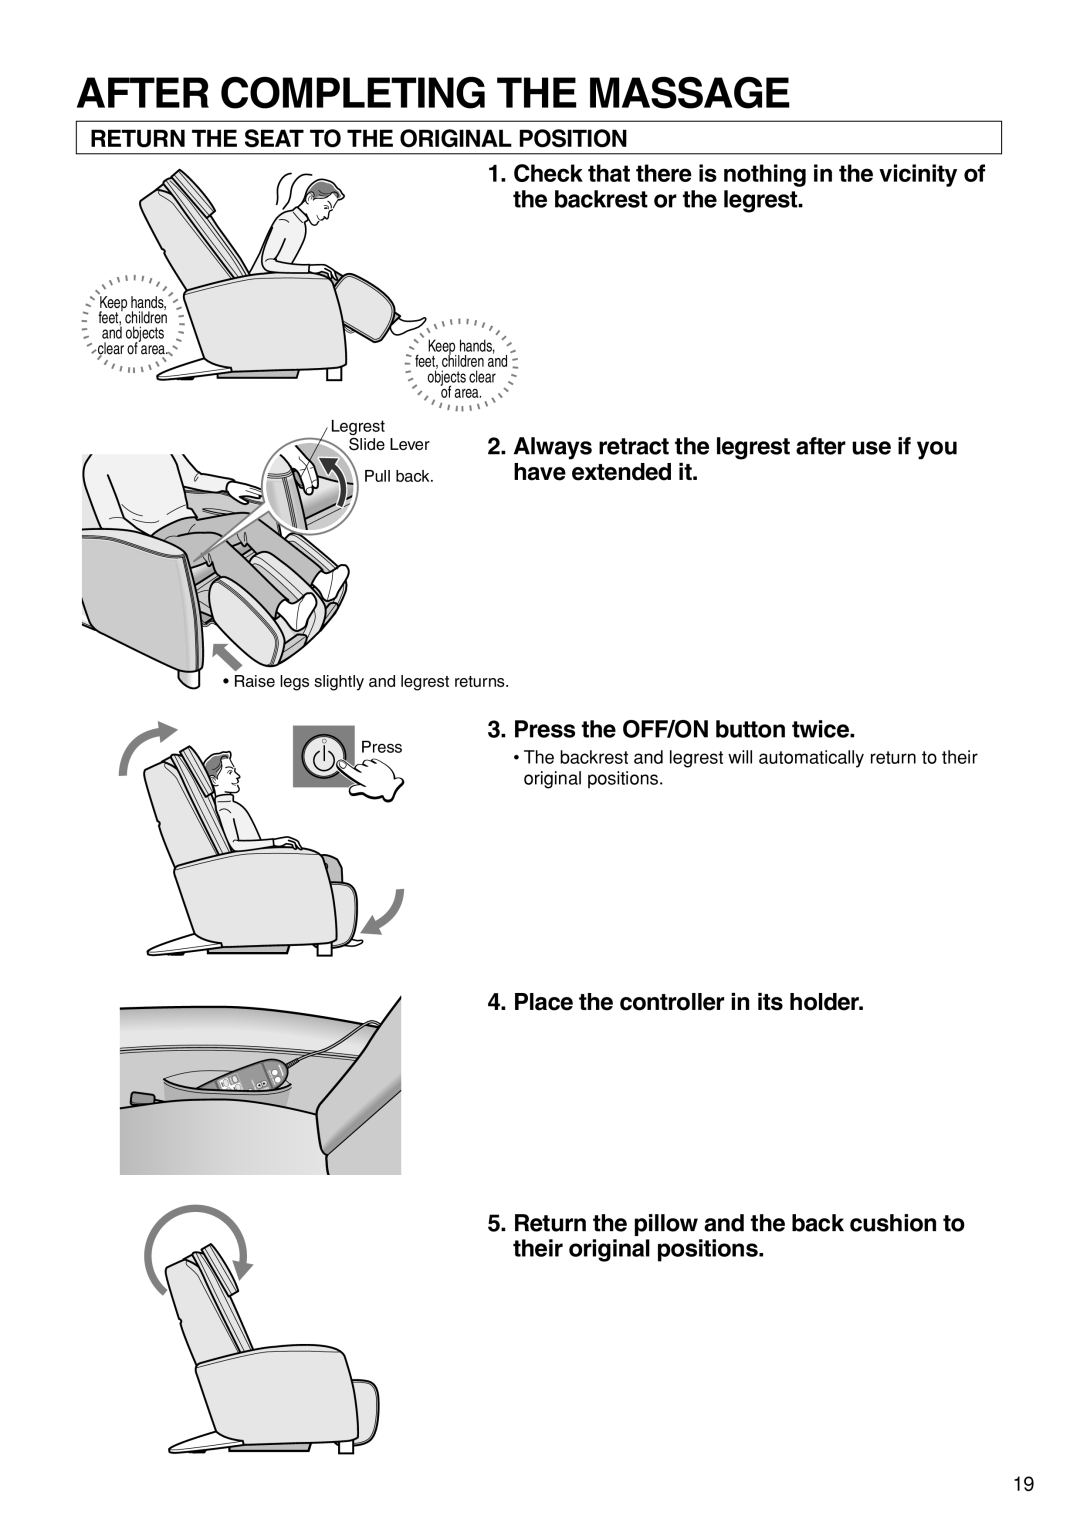 Panasonic EP1273 After Completing The Massage, Return The Seat To The Original Position, have extended it 